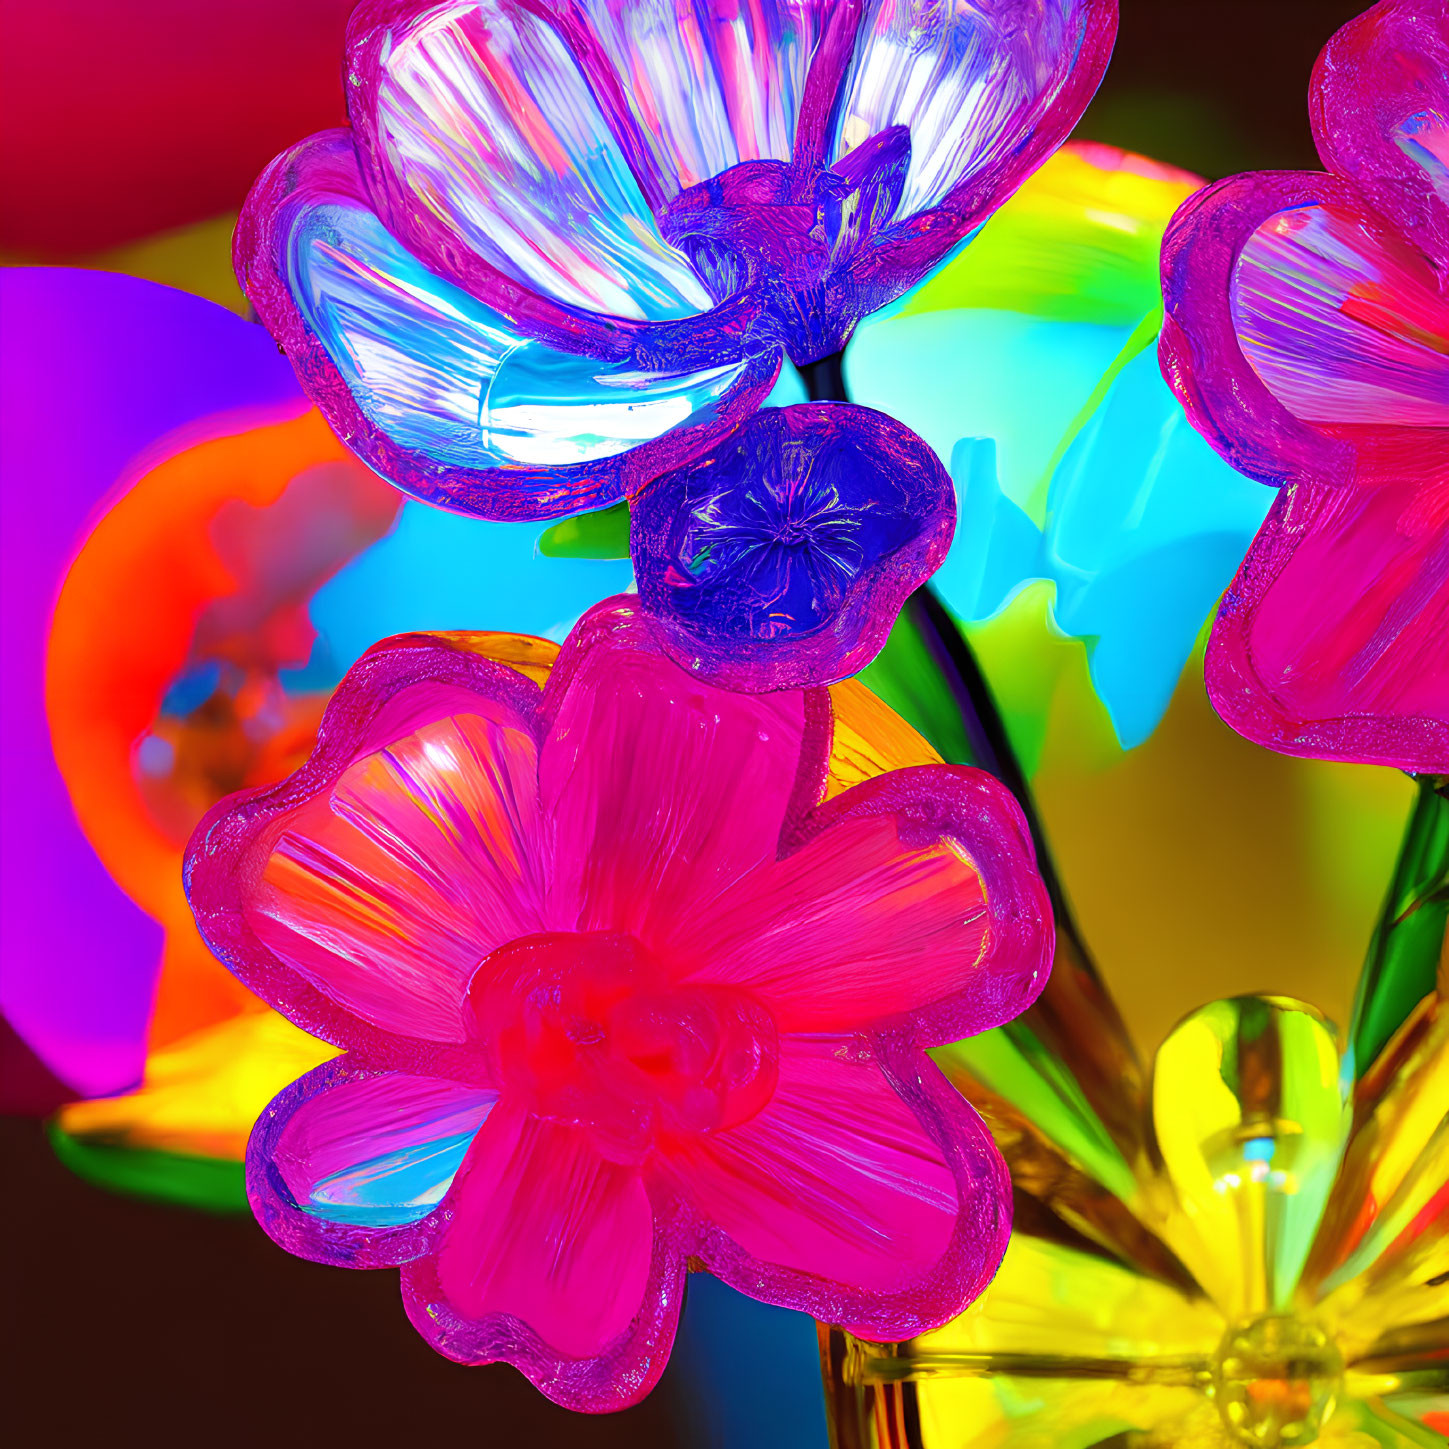 Vibrant translucent plastic flowers in blue, pink, yellow, and green.